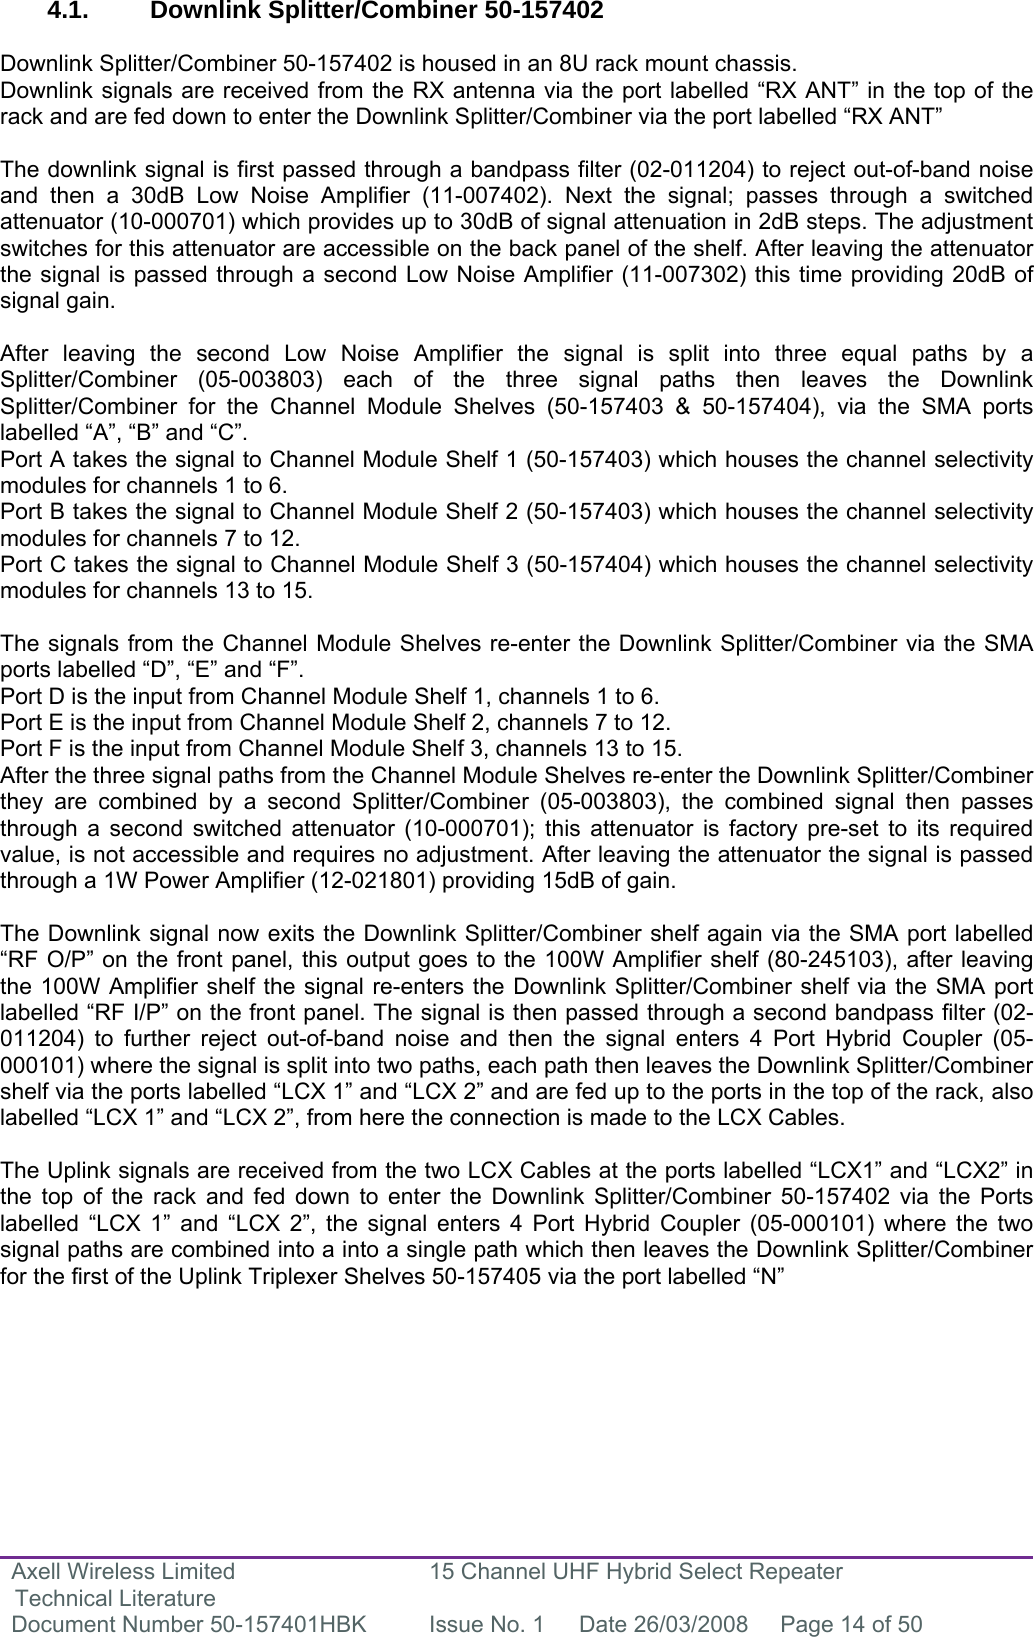 Axell Wireless Limited Technical Literature 15 Channel UHF Hybrid Select Repeater Document Number 50-157401HBK  Issue No. 1  Date 26/03/2008  Page 14 of 50   4.1. Downlink Splitter/Combiner 50-157402  Downlink Splitter/Combiner 50-157402 is housed in an 8U rack mount chassis.  Downlink signals are received from the RX antenna via the port labelled “RX ANT” in the top of the rack and are fed down to enter the Downlink Splitter/Combiner via the port labelled “RX ANT”  The downlink signal is first passed through a bandpass filter (02-011204) to reject out-of-band noise and then a 30dB Low Noise Amplifier (11-007402). Next the signal; passes through a switched attenuator (10-000701) which provides up to 30dB of signal attenuation in 2dB steps. The adjustment switches for this attenuator are accessible on the back panel of the shelf. After leaving the attenuator the signal is passed through a second Low Noise Amplifier (11-007302) this time providing 20dB of signal gain.   After leaving the second Low Noise Amplifier the signal is split into three equal paths by a Splitter/Combiner (05-003803) each of the three signal paths then leaves the Downlink Splitter/Combiner for the Channel Module Shelves (50-157403 &amp; 50-157404), via the SMA ports labelled “A”, “B” and “C”.  Port A takes the signal to Channel Module Shelf 1 (50-157403) which houses the channel selectivity modules for channels 1 to 6. Port B takes the signal to Channel Module Shelf 2 (50-157403) which houses the channel selectivity modules for channels 7 to 12. Port C takes the signal to Channel Module Shelf 3 (50-157404) which houses the channel selectivity modules for channels 13 to 15.  The signals from the Channel Module Shelves re-enter the Downlink Splitter/Combiner via the SMA ports labelled “D”, “E” and “F”.  Port D is the input from Channel Module Shelf 1, channels 1 to 6. Port E is the input from Channel Module Shelf 2, channels 7 to 12. Port F is the input from Channel Module Shelf 3, channels 13 to 15. After the three signal paths from the Channel Module Shelves re-enter the Downlink Splitter/Combiner they are combined by a second Splitter/Combiner (05-003803), the combined signal then passes through a second switched attenuator (10-000701); this attenuator is factory pre-set to its required value, is not accessible and requires no adjustment. After leaving the attenuator the signal is passed through a 1W Power Amplifier (12-021801) providing 15dB of gain.   The Downlink signal now exits the Downlink Splitter/Combiner shelf again via the SMA port labelled “RF O/P” on the front panel, this output goes to the 100W Amplifier shelf (80-245103), after leaving the 100W Amplifier shelf the signal re-enters the Downlink Splitter/Combiner shelf via the SMA port labelled “RF I/P” on the front panel. The signal is then passed through a second bandpass filter (02-011204) to further reject out-of-band noise and then the signal enters 4 Port Hybrid Coupler (05-000101) where the signal is split into two paths, each path then leaves the Downlink Splitter/Combiner shelf via the ports labelled “LCX 1” and “LCX 2” and are fed up to the ports in the top of the rack, also labelled “LCX 1” and “LCX 2”, from here the connection is made to the LCX Cables.  The Uplink signals are received from the two LCX Cables at the ports labelled “LCX1” and “LCX2” in the top of the rack and fed down to enter the Downlink Splitter/Combiner 50-157402 via the Ports labelled “LCX 1” and “LCX 2”, the signal enters 4 Port Hybrid Coupler (05-000101) where the two signal paths are combined into a into a single path which then leaves the Downlink Splitter/Combiner for the first of the Uplink Triplexer Shelves 50-157405 via the port labelled “N”    